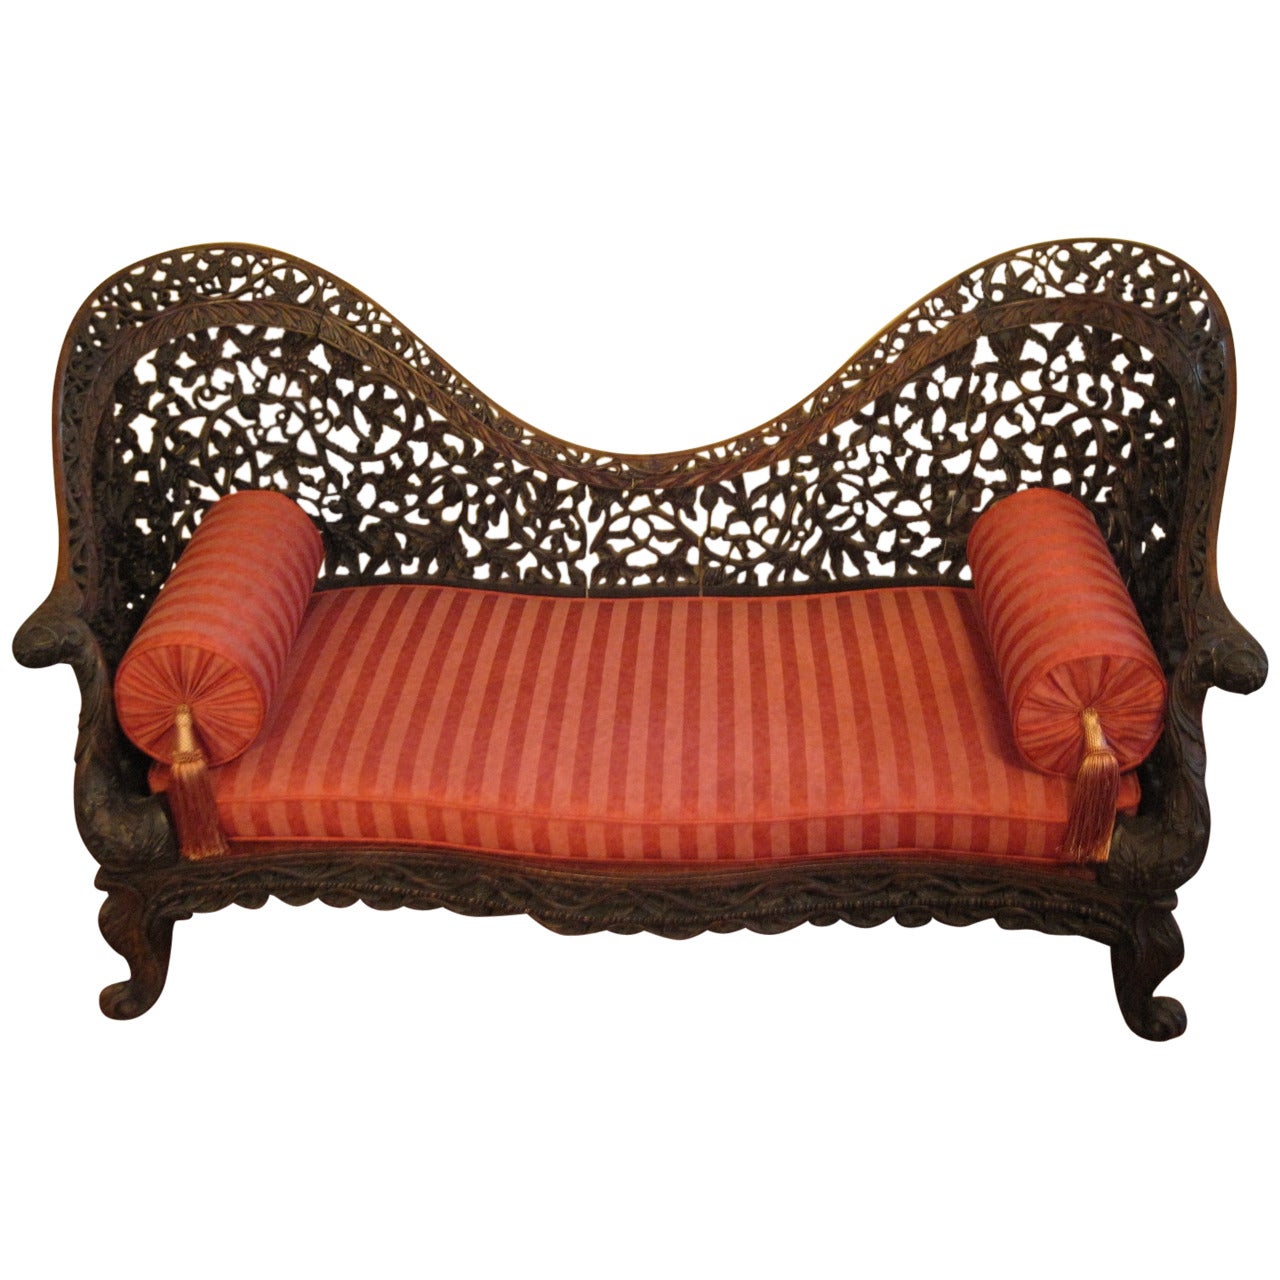 Anglo Indian Settee, Late 18th or Early 19th Century Carved Rosewood For Sale